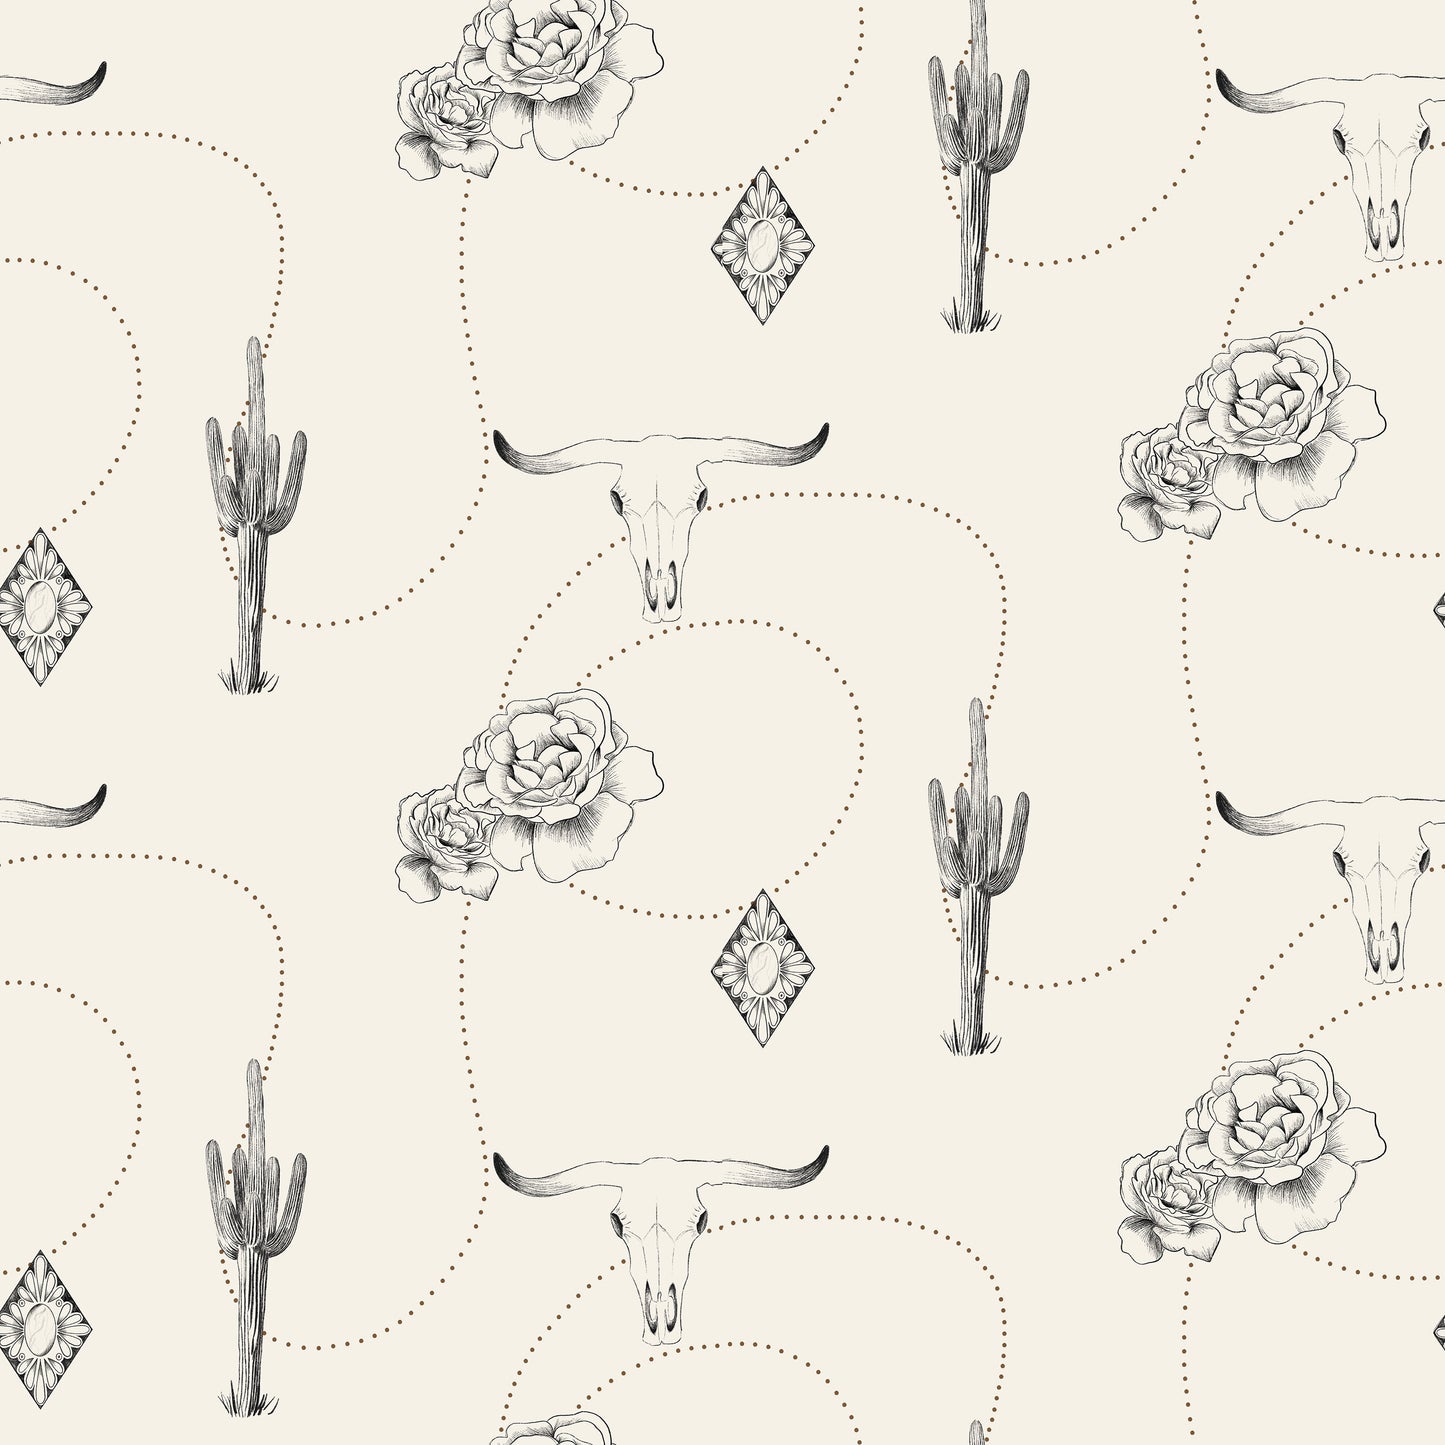 Cowgirl rose, desert, bull skull & cactus print on white background easy to install and remove peel and stick custom wallpaper available in different lengths/sizes locally created and printed in Canada Artichoke wallpaper. Washable, durable, commercial grade, removable and waterproof.